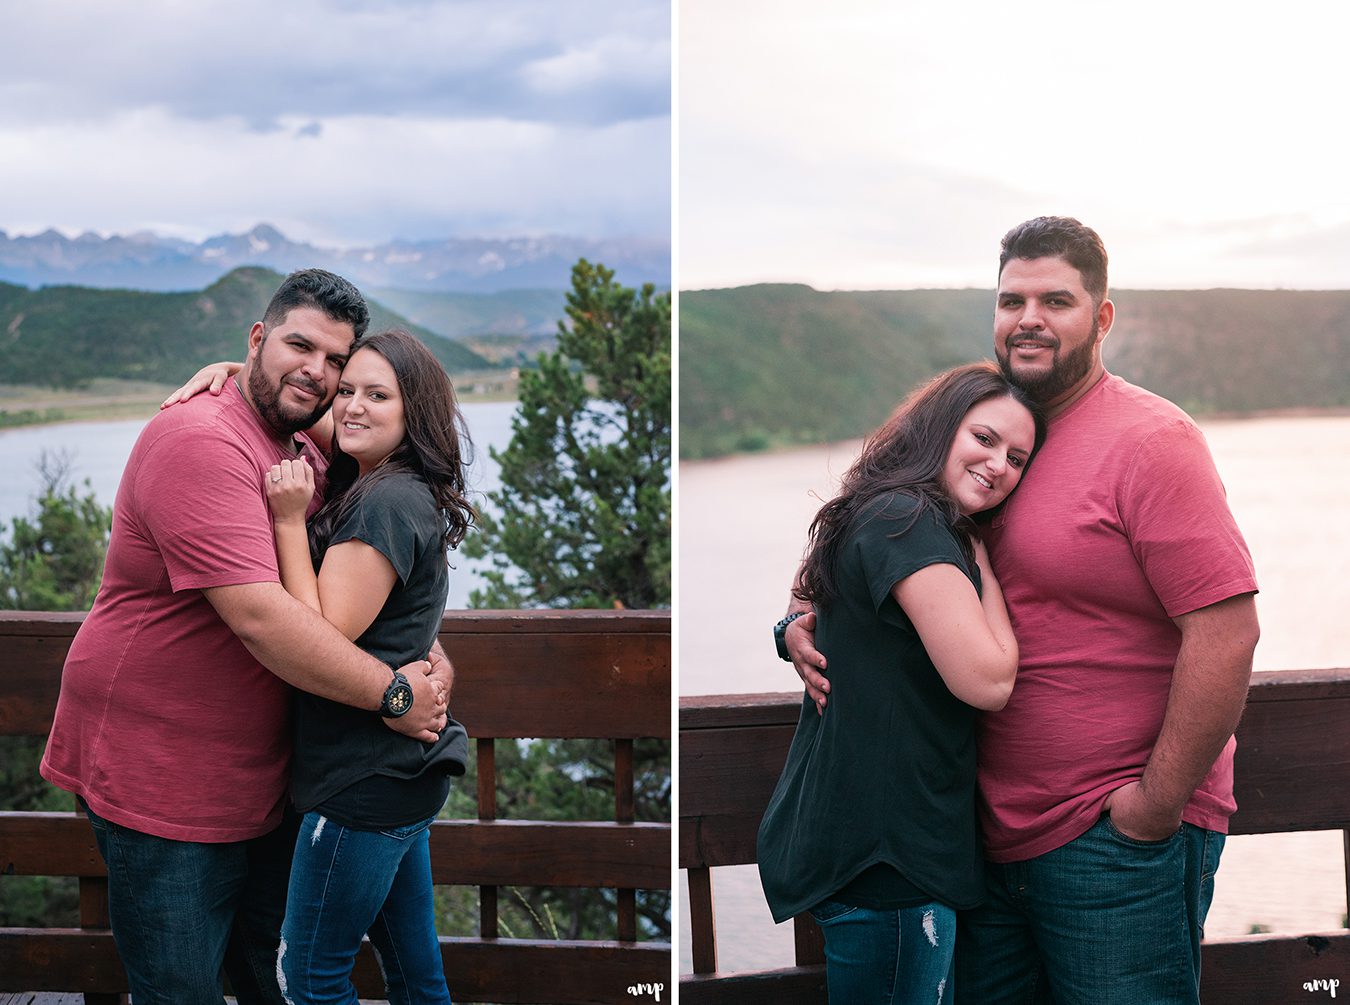 Engagement photos at the Ridgway state park overlook